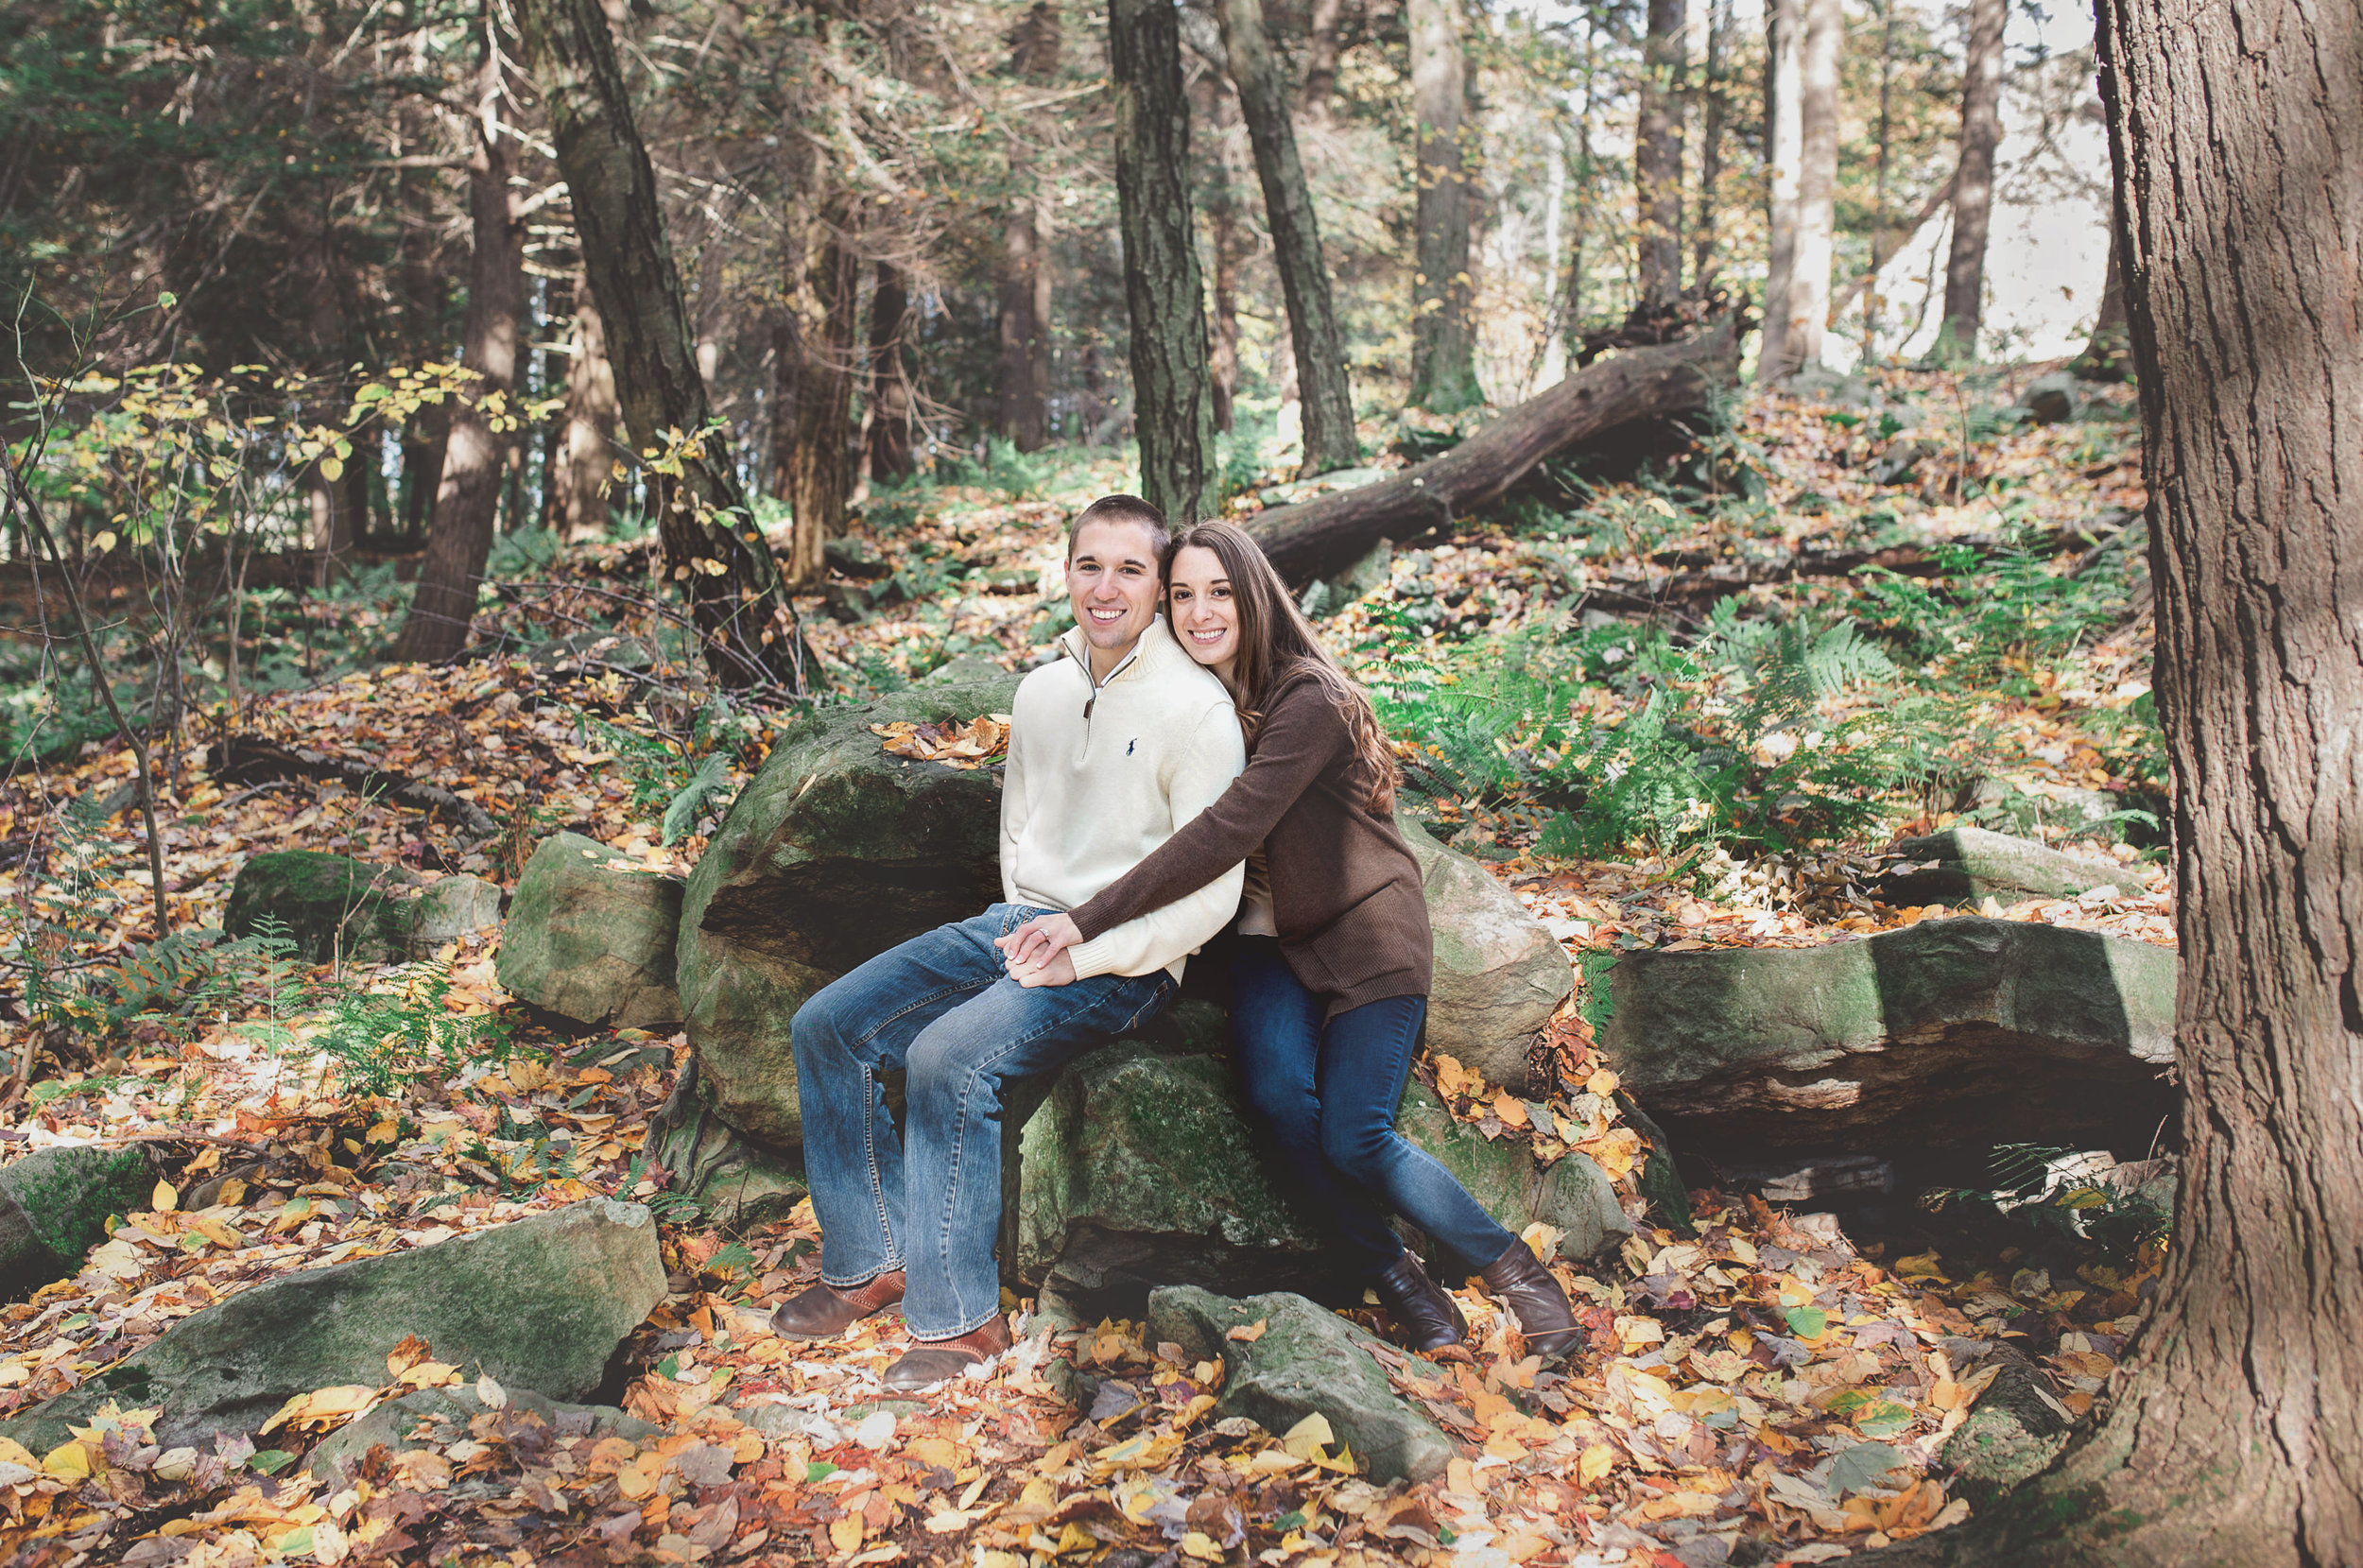 Altoona PA central pa state college Monroville wedding photographer engagement lemon house cresson pa_mariadylan (7).jpg